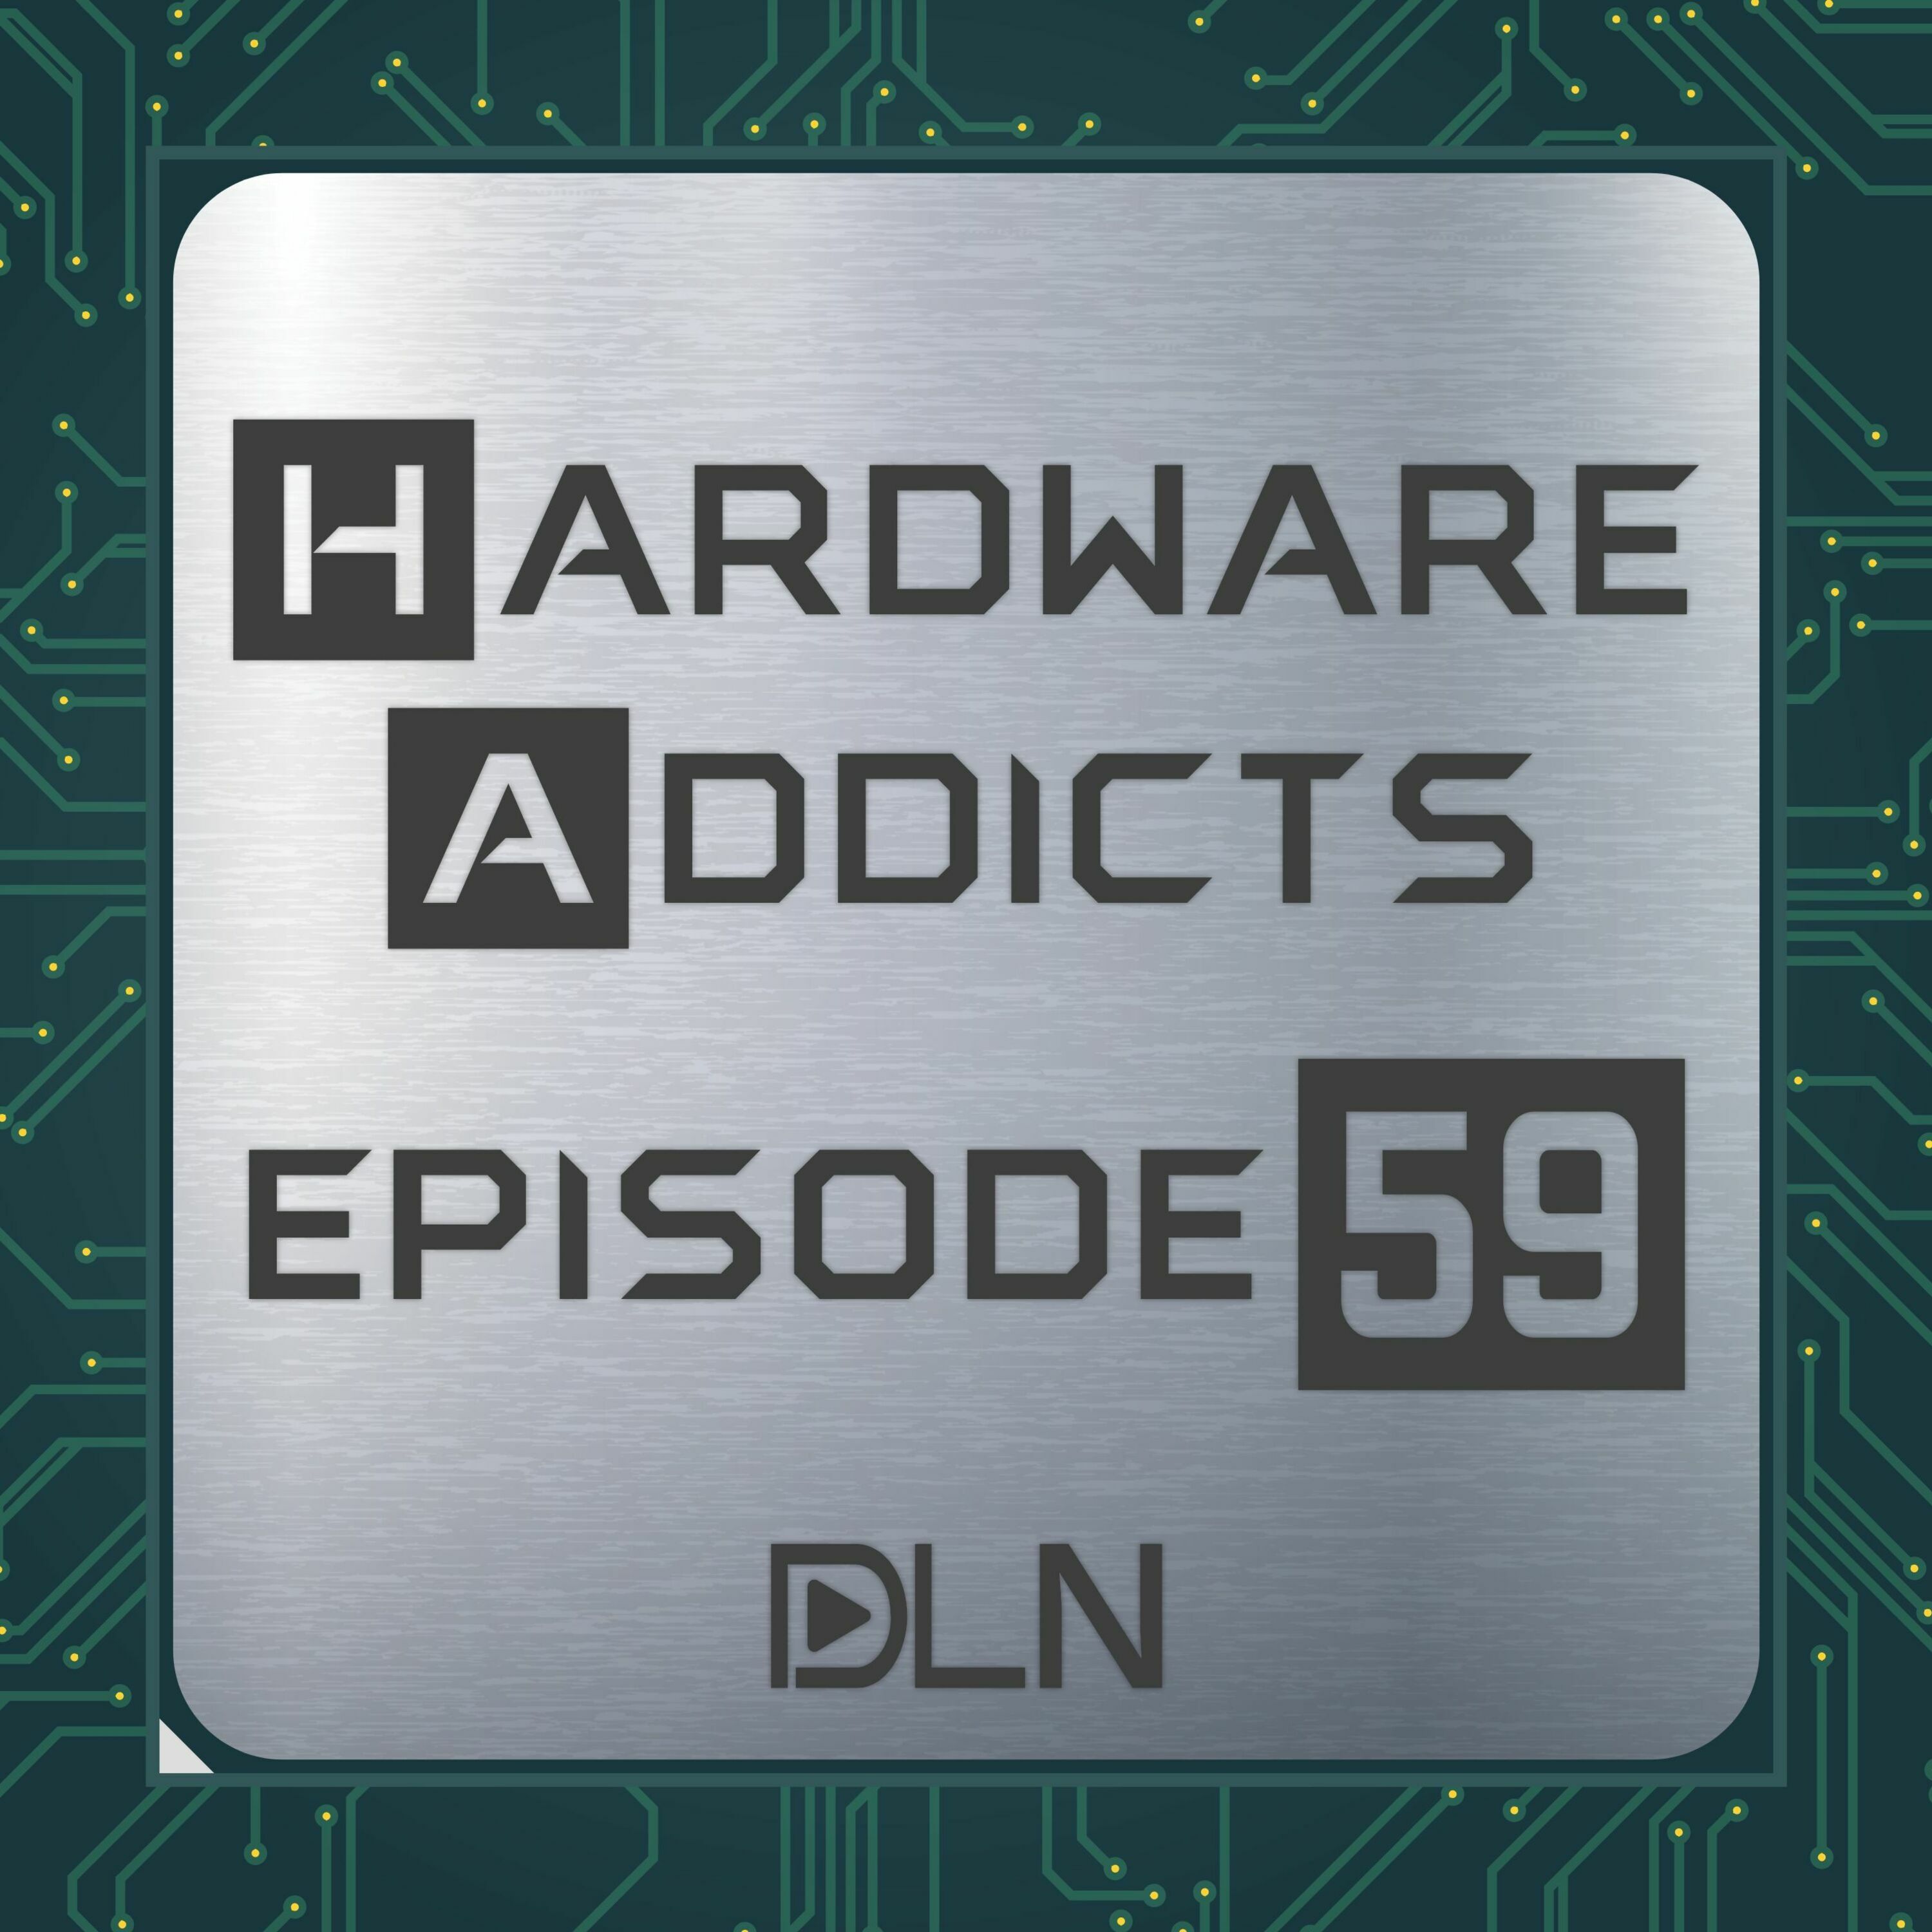 59: Cyberpunk Yourself With Implantable Tech?